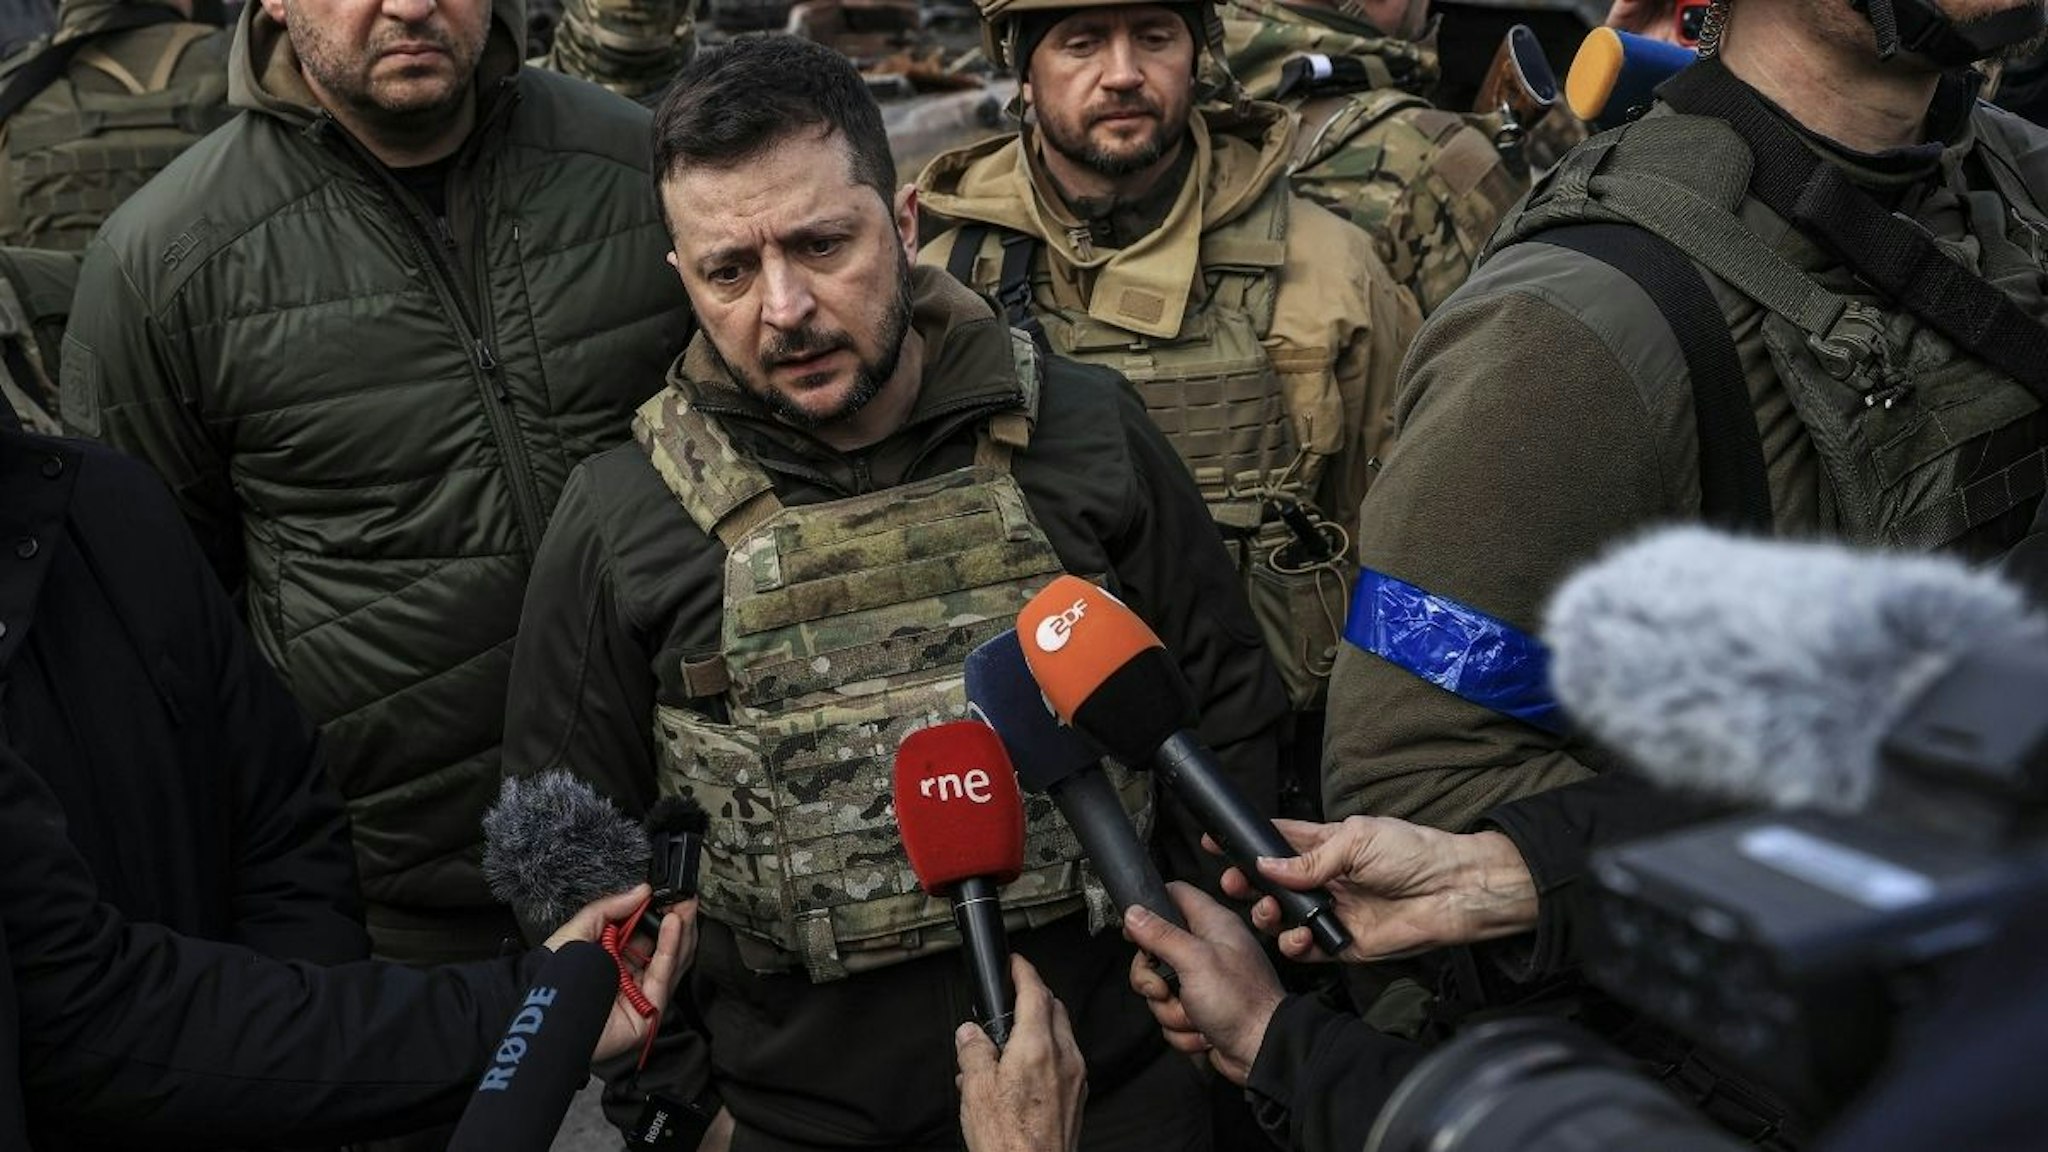 Ukrainian President Volodymyr Zelenskyy accompanied by Ukrainian soldiers speaks to press during his visit at the town of Bucha, after it was liberated from Russian Army, in Bucha, Ukraine on April 04, 2022.